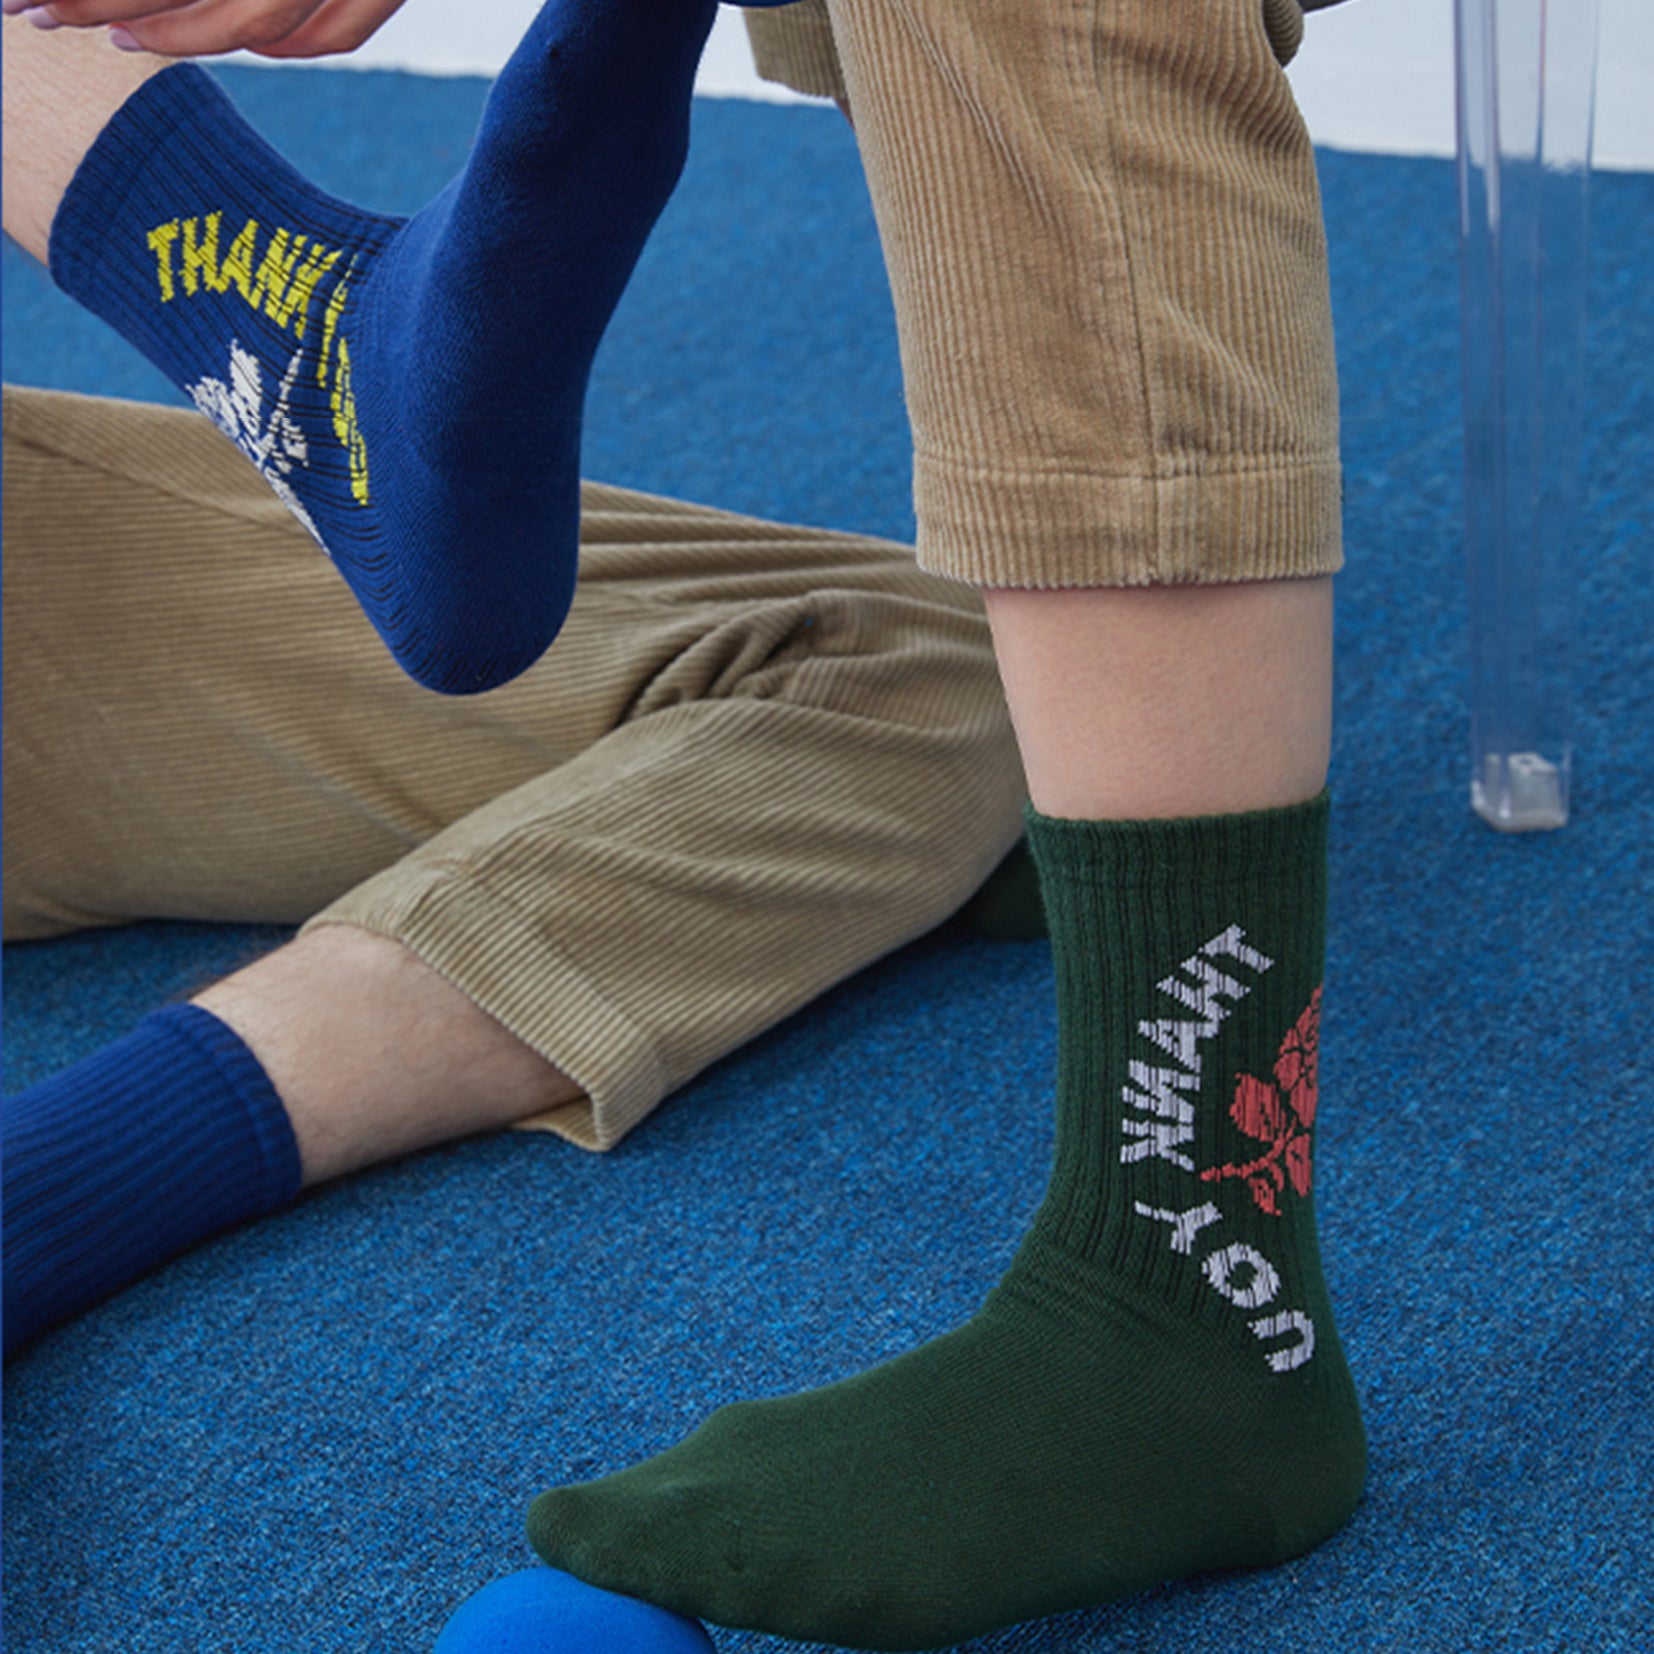 Market Collection "thank you" retro rose ribbed mid-calf sock in 2 colours